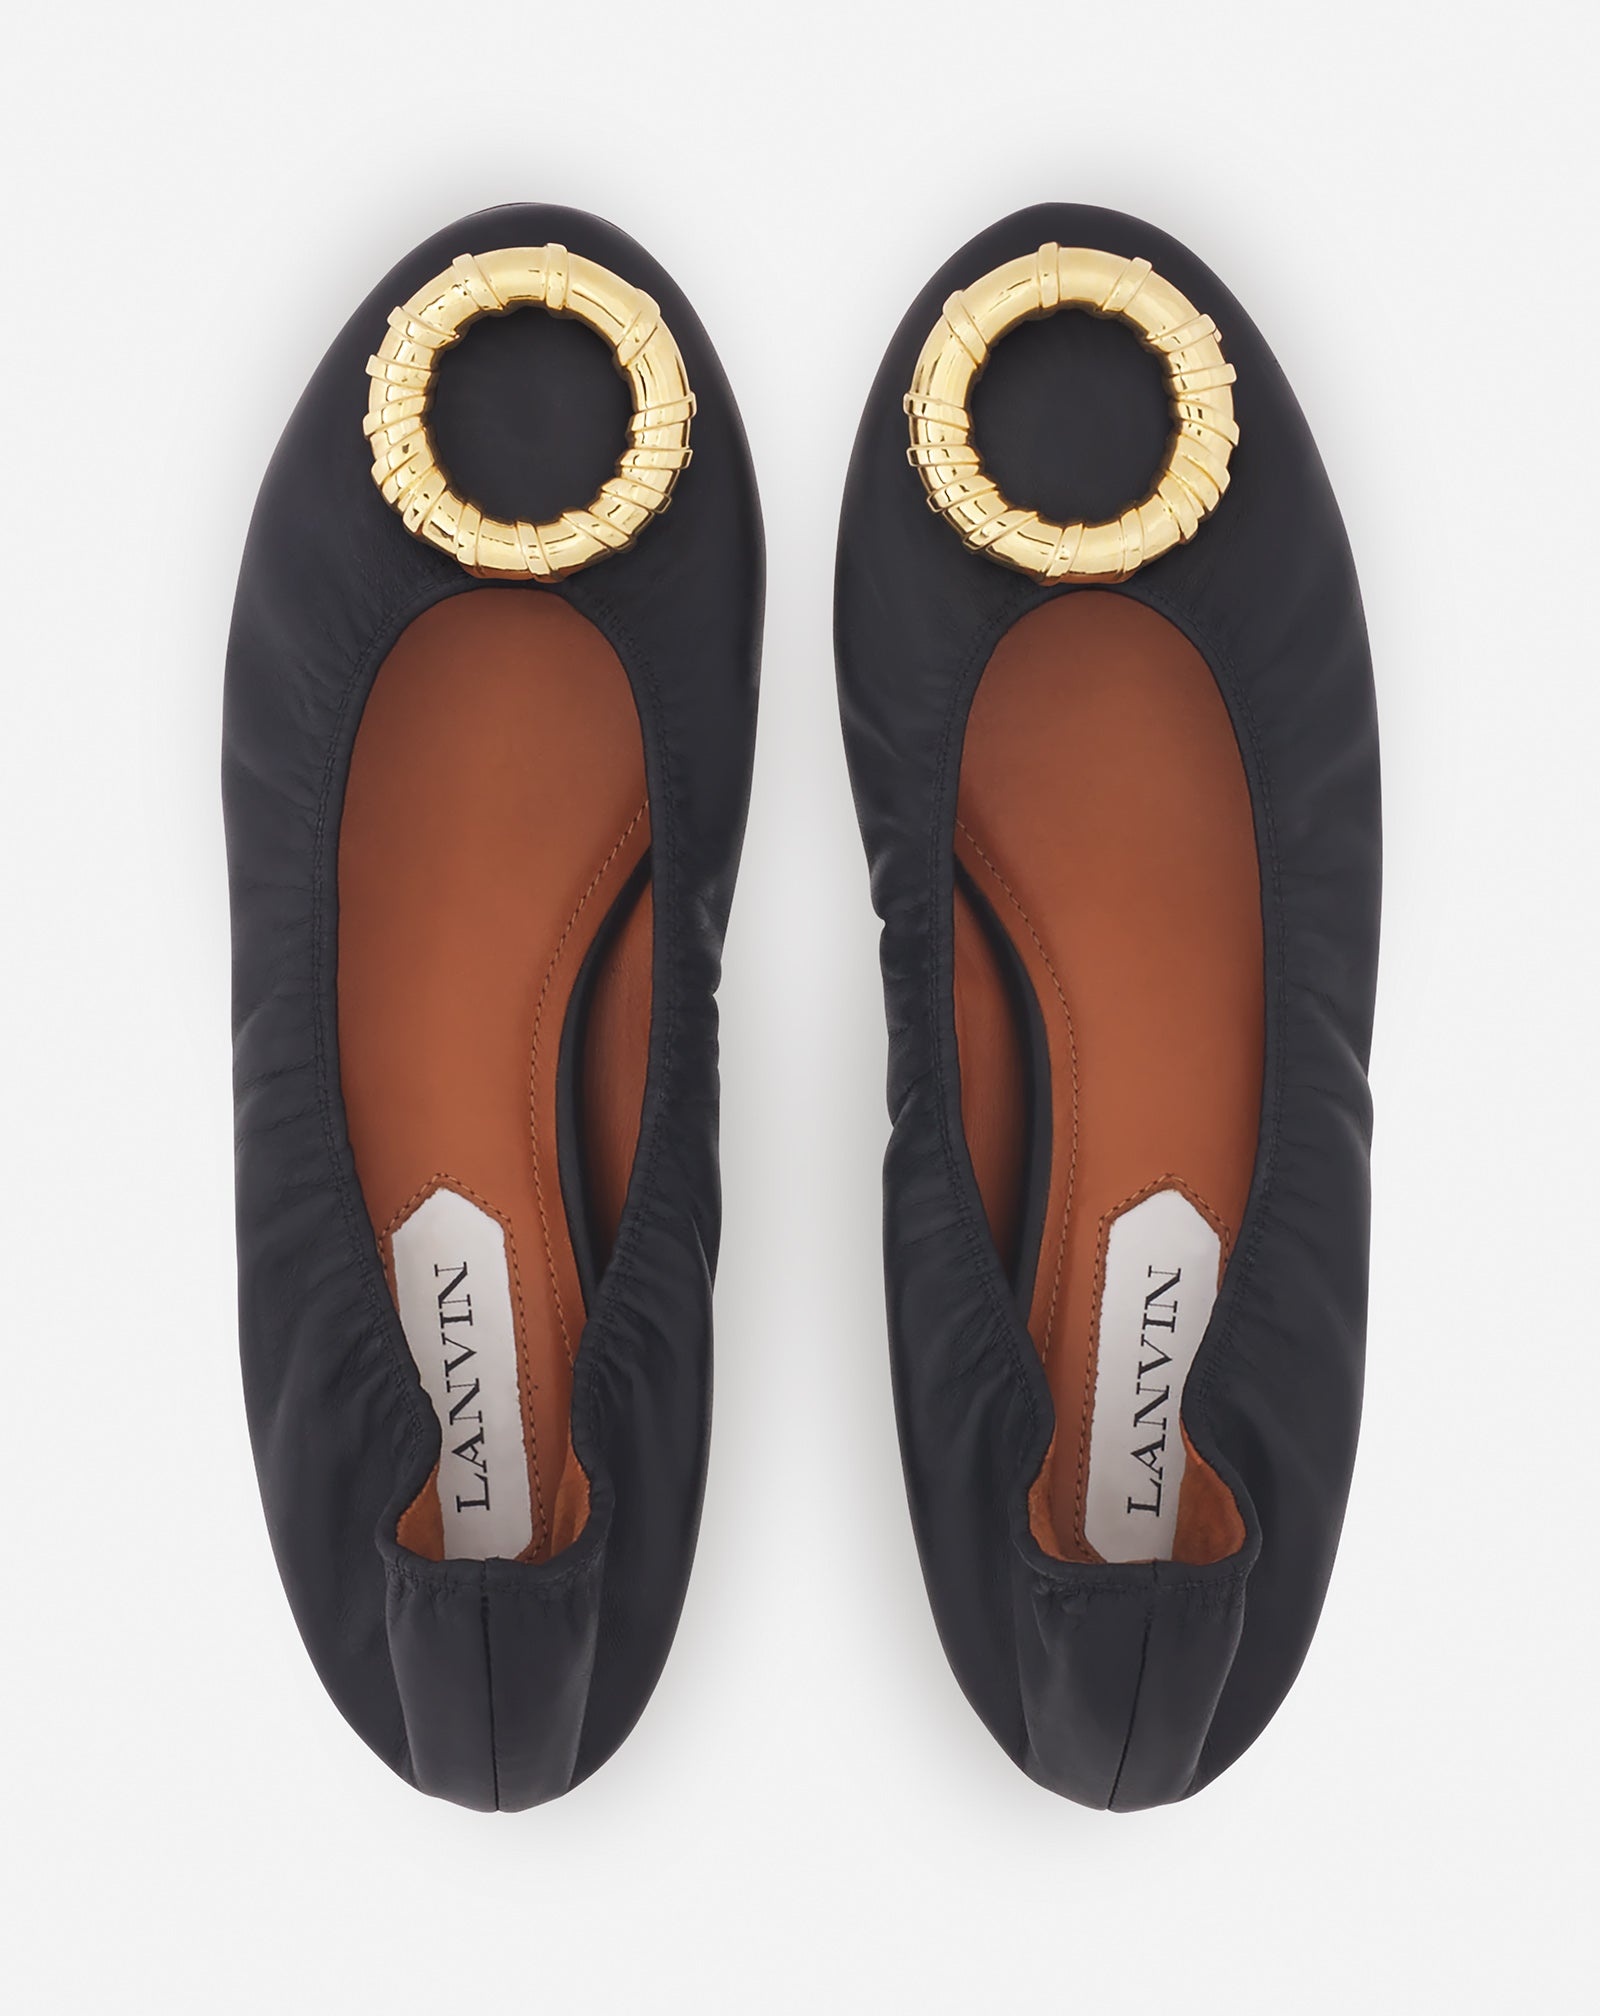 MELODIE LEATHER BALLERINA FLAT - 3